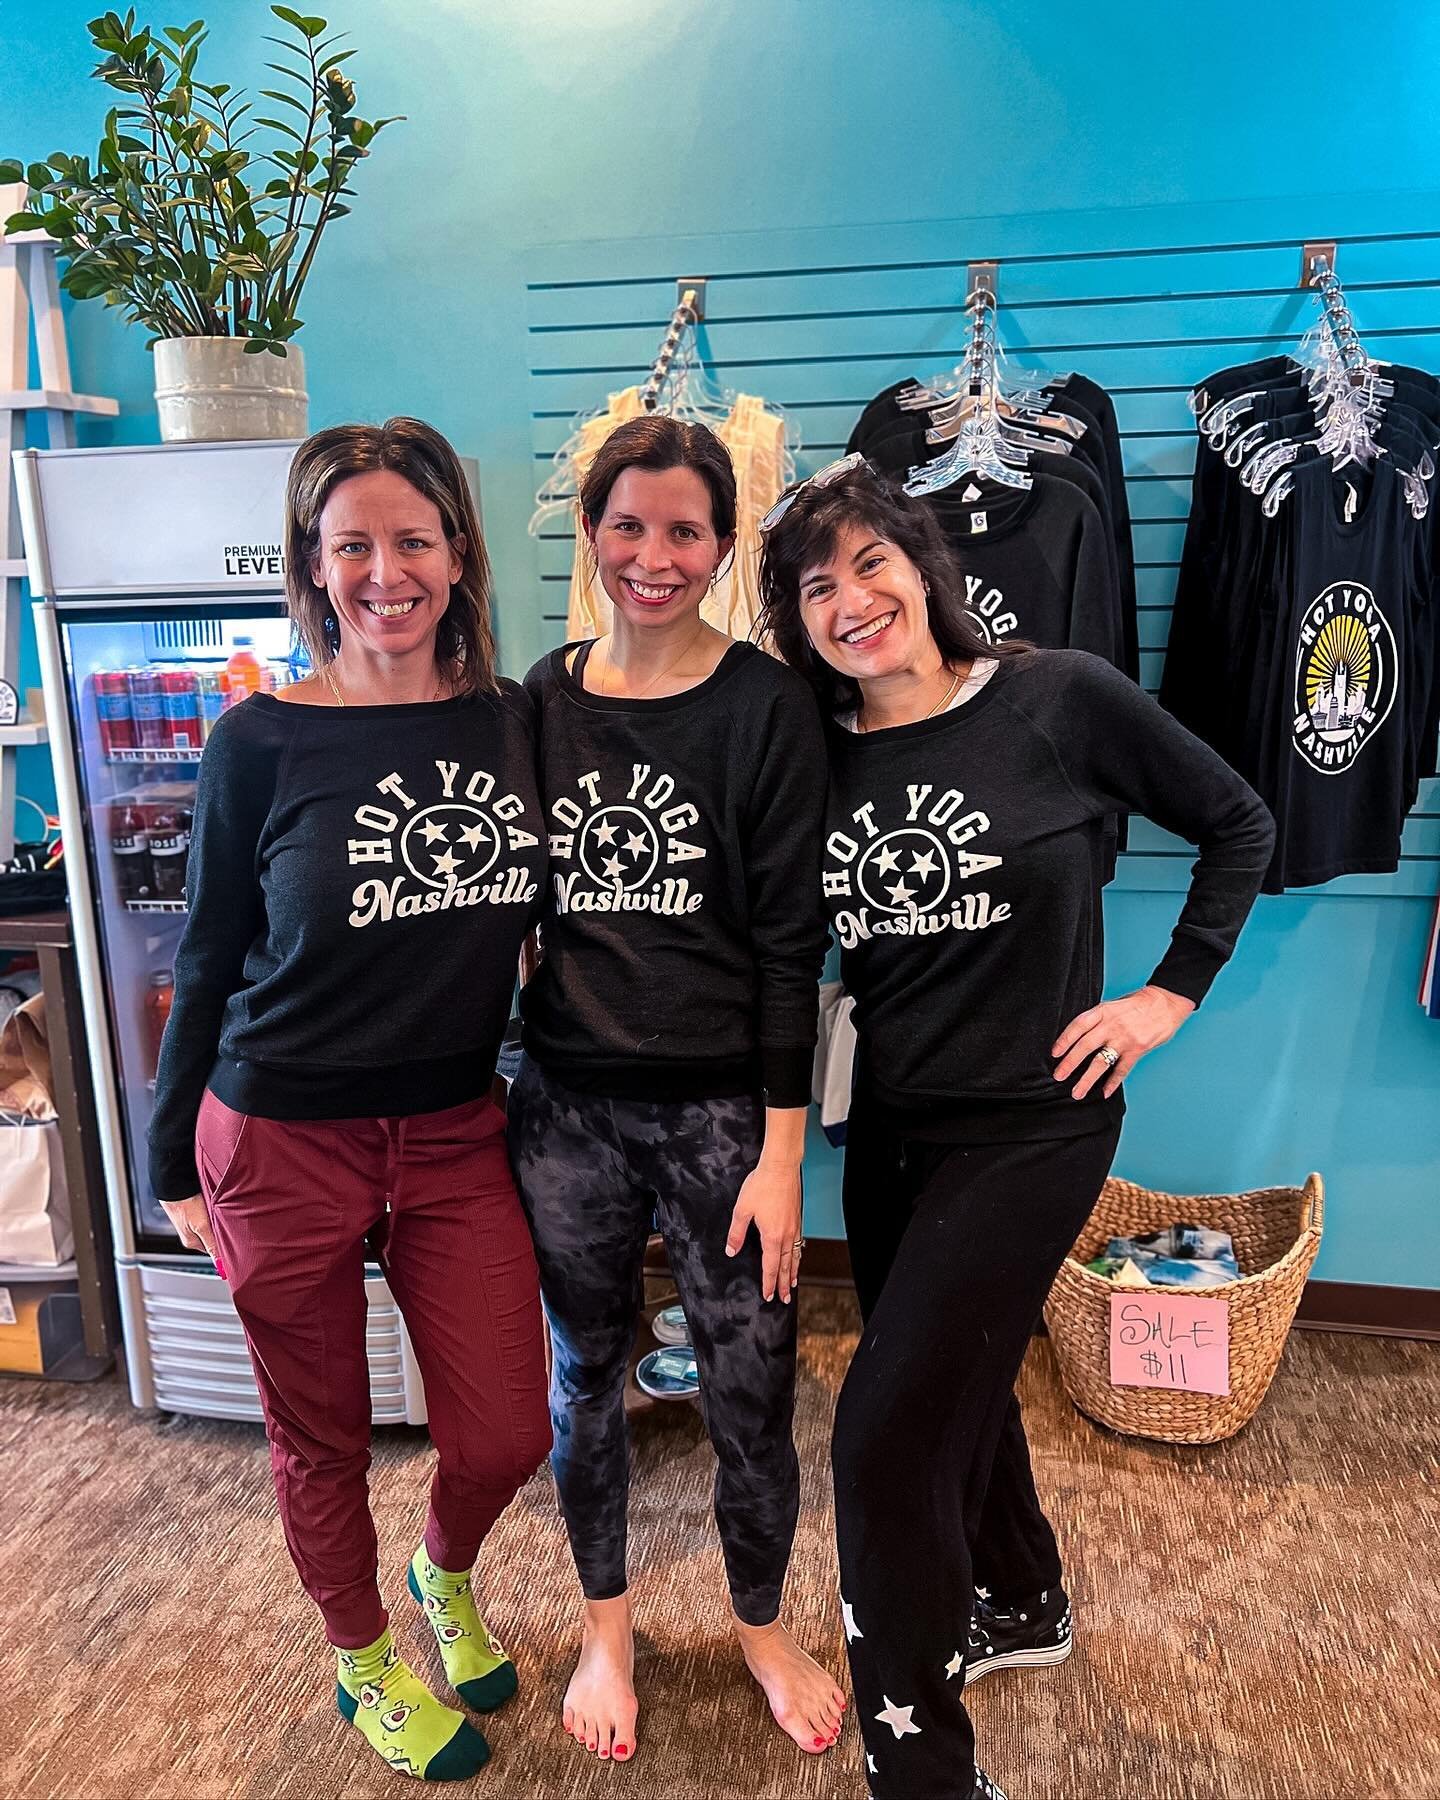 More of our new merch! New sweatshirts &amp; new tanks! Make your friends jealous and get your day AND night beachware now! Rep your favorite yoga studio all summer long! ☀️🌞🕶️⛱️🍉🤸&zwj;♀️

#isitsummeryet #newmerch #hotyoganashville #yogaheals #or